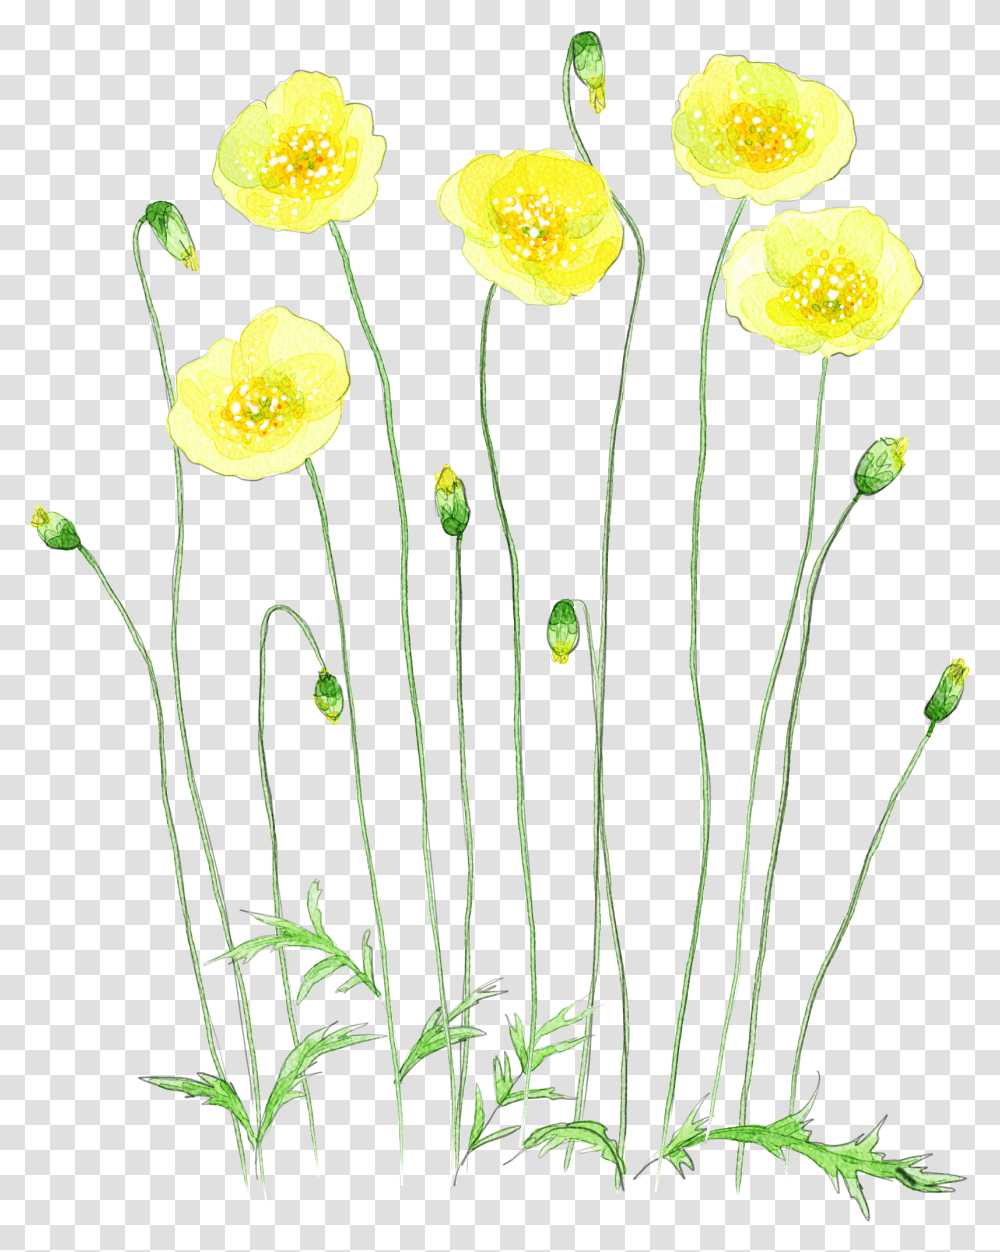 Download Hd Image Royalty Free Chamomile Drawing Watercolor Tansy, Plant, Flower, Blossom, Daffodil Transparent Png